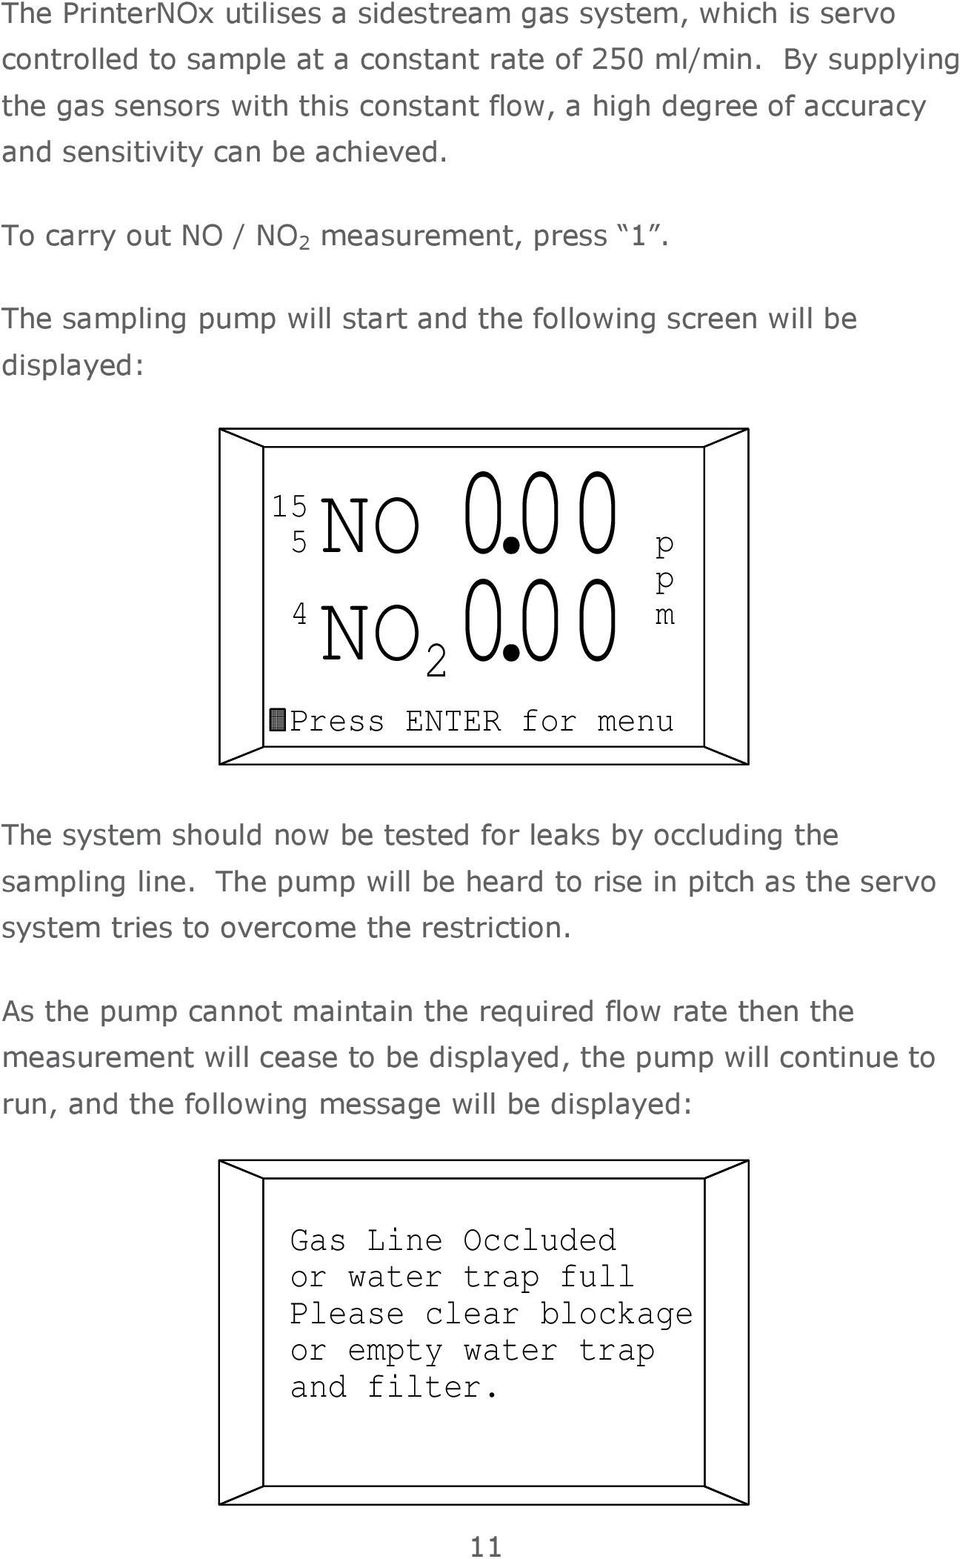 The sampling pump will start and the following screen will be displayed: NO NO 000. 2000. 15 5 p p 4 m Press ENTER for menu The system should now be tested for leaks by occluding the sampling line.